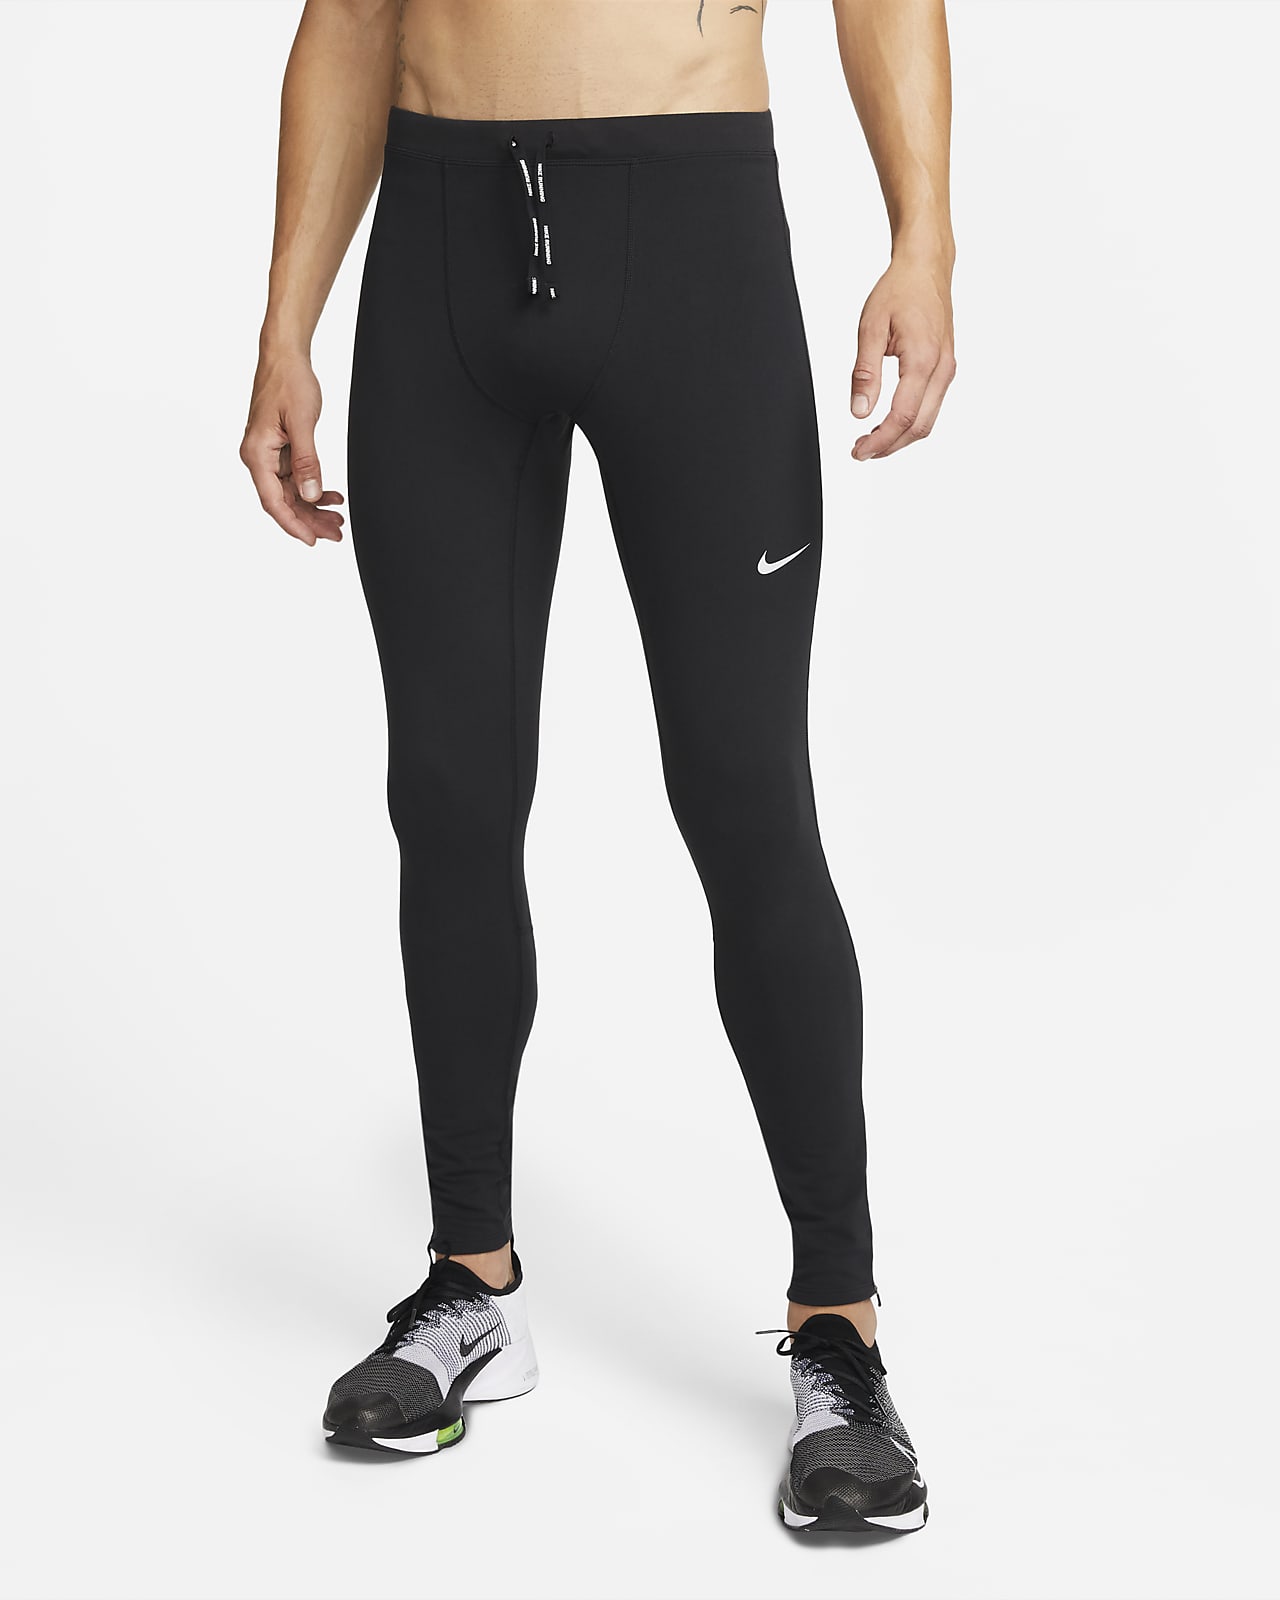 Nike Repel Challenger Tights.